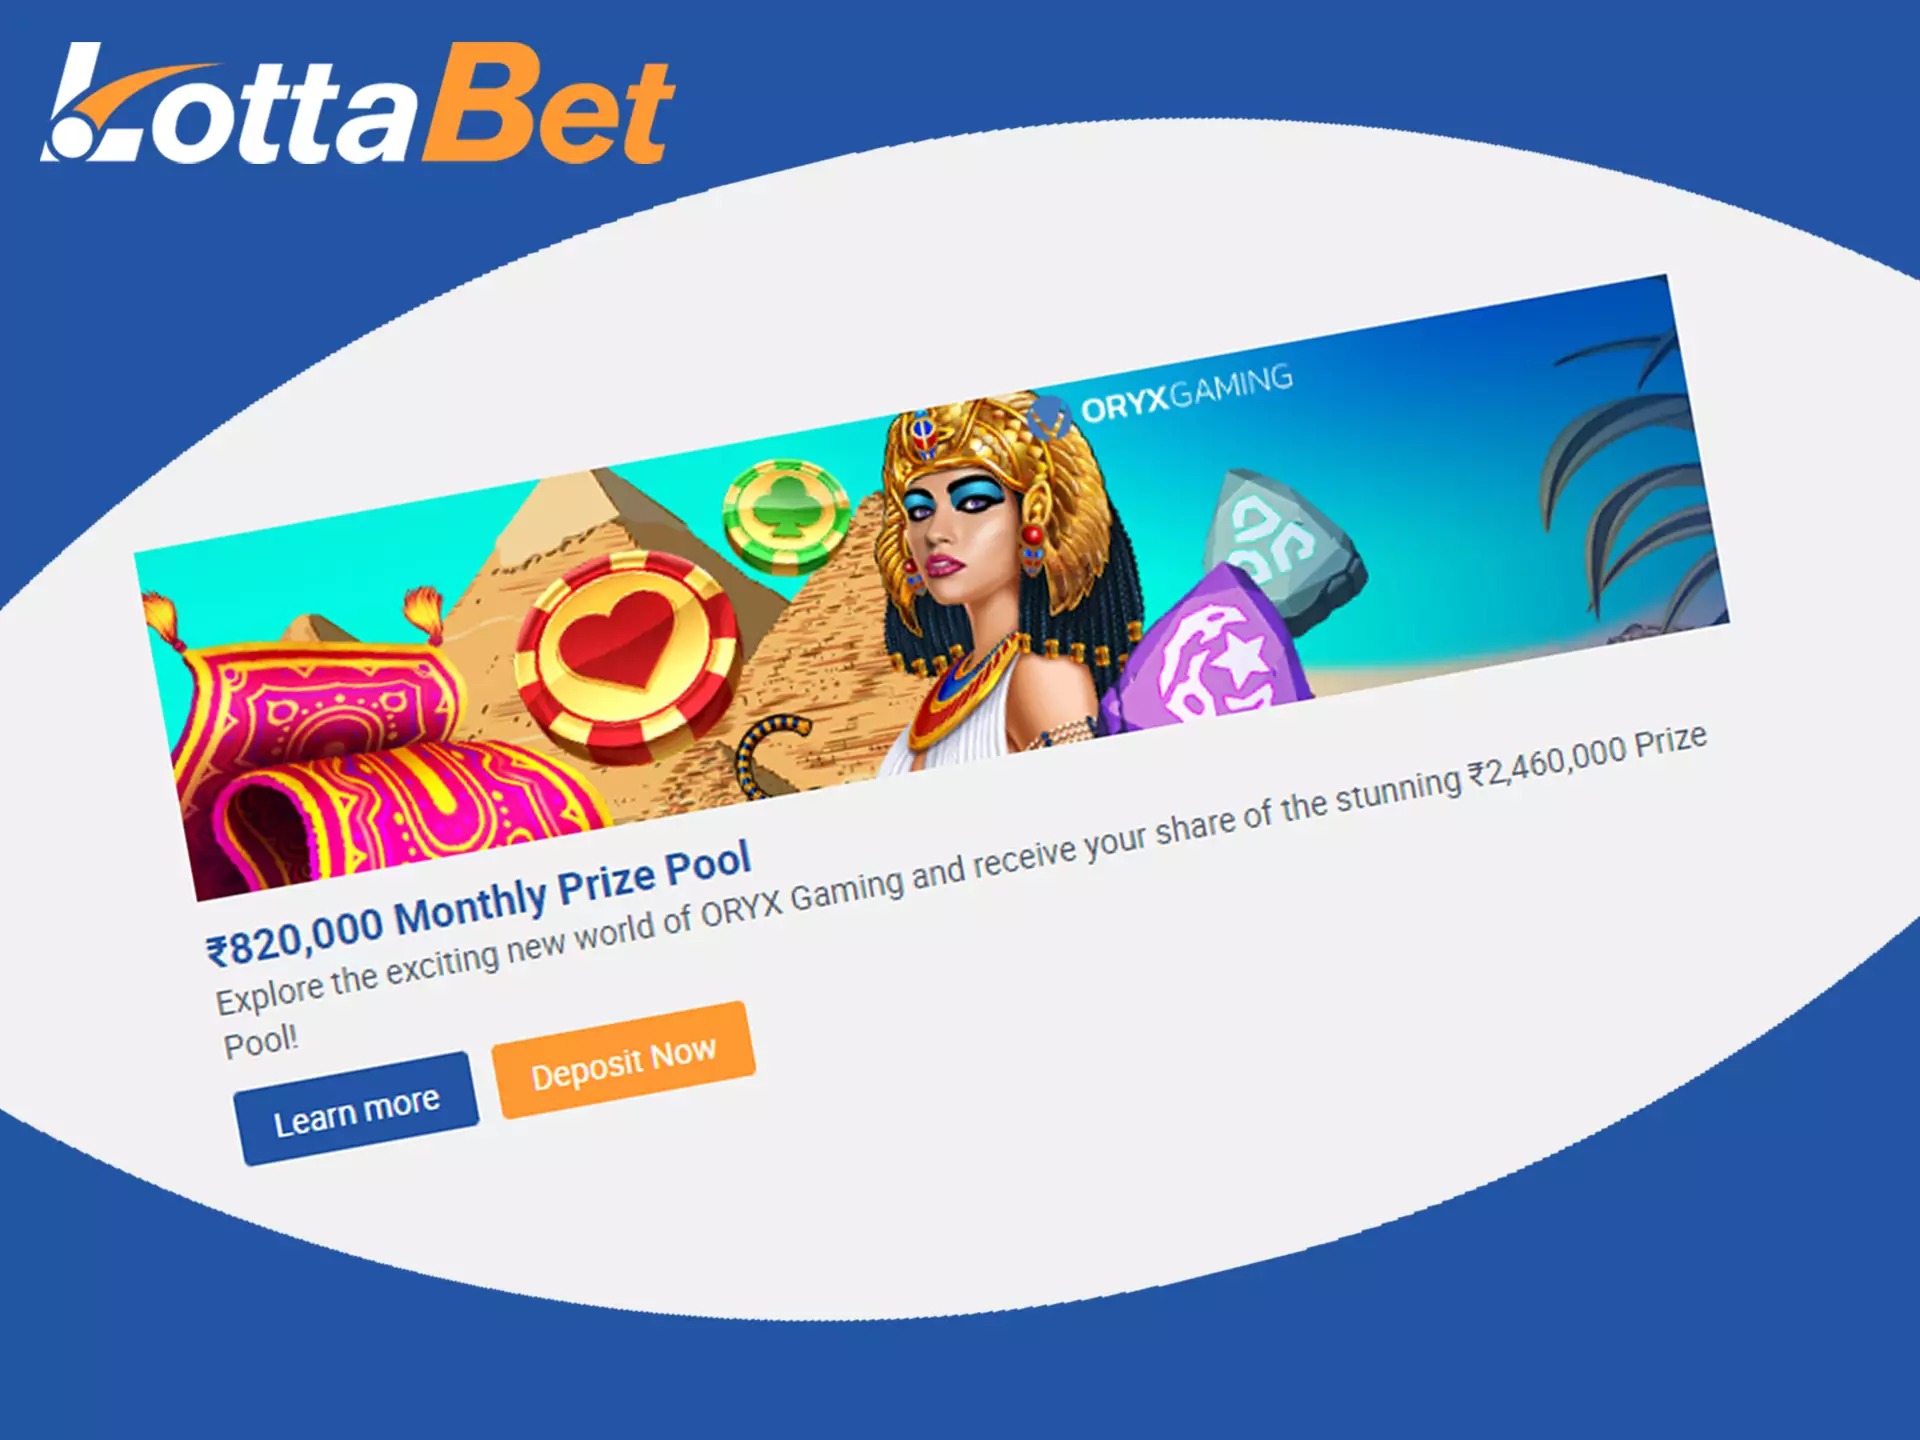 Bet regularly on sports and get bonuses.